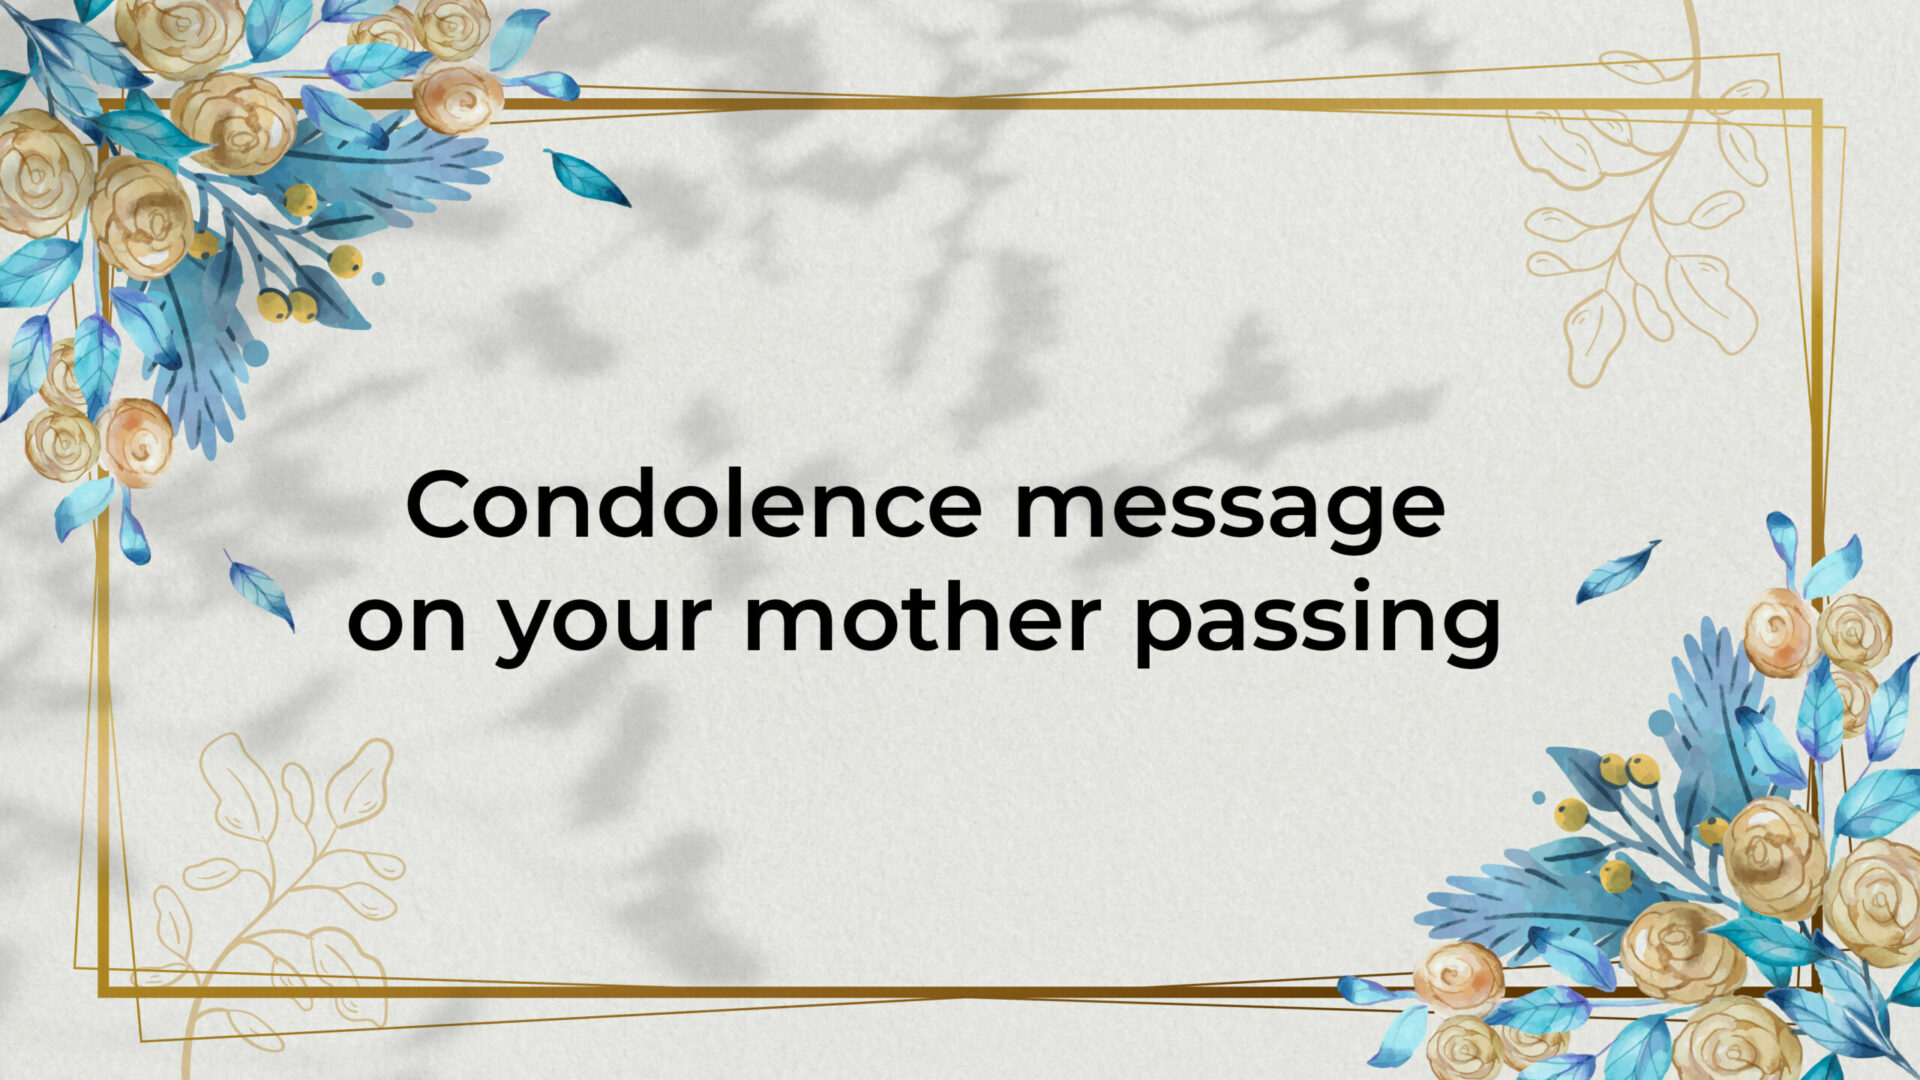 Condolence message on your mother passing word